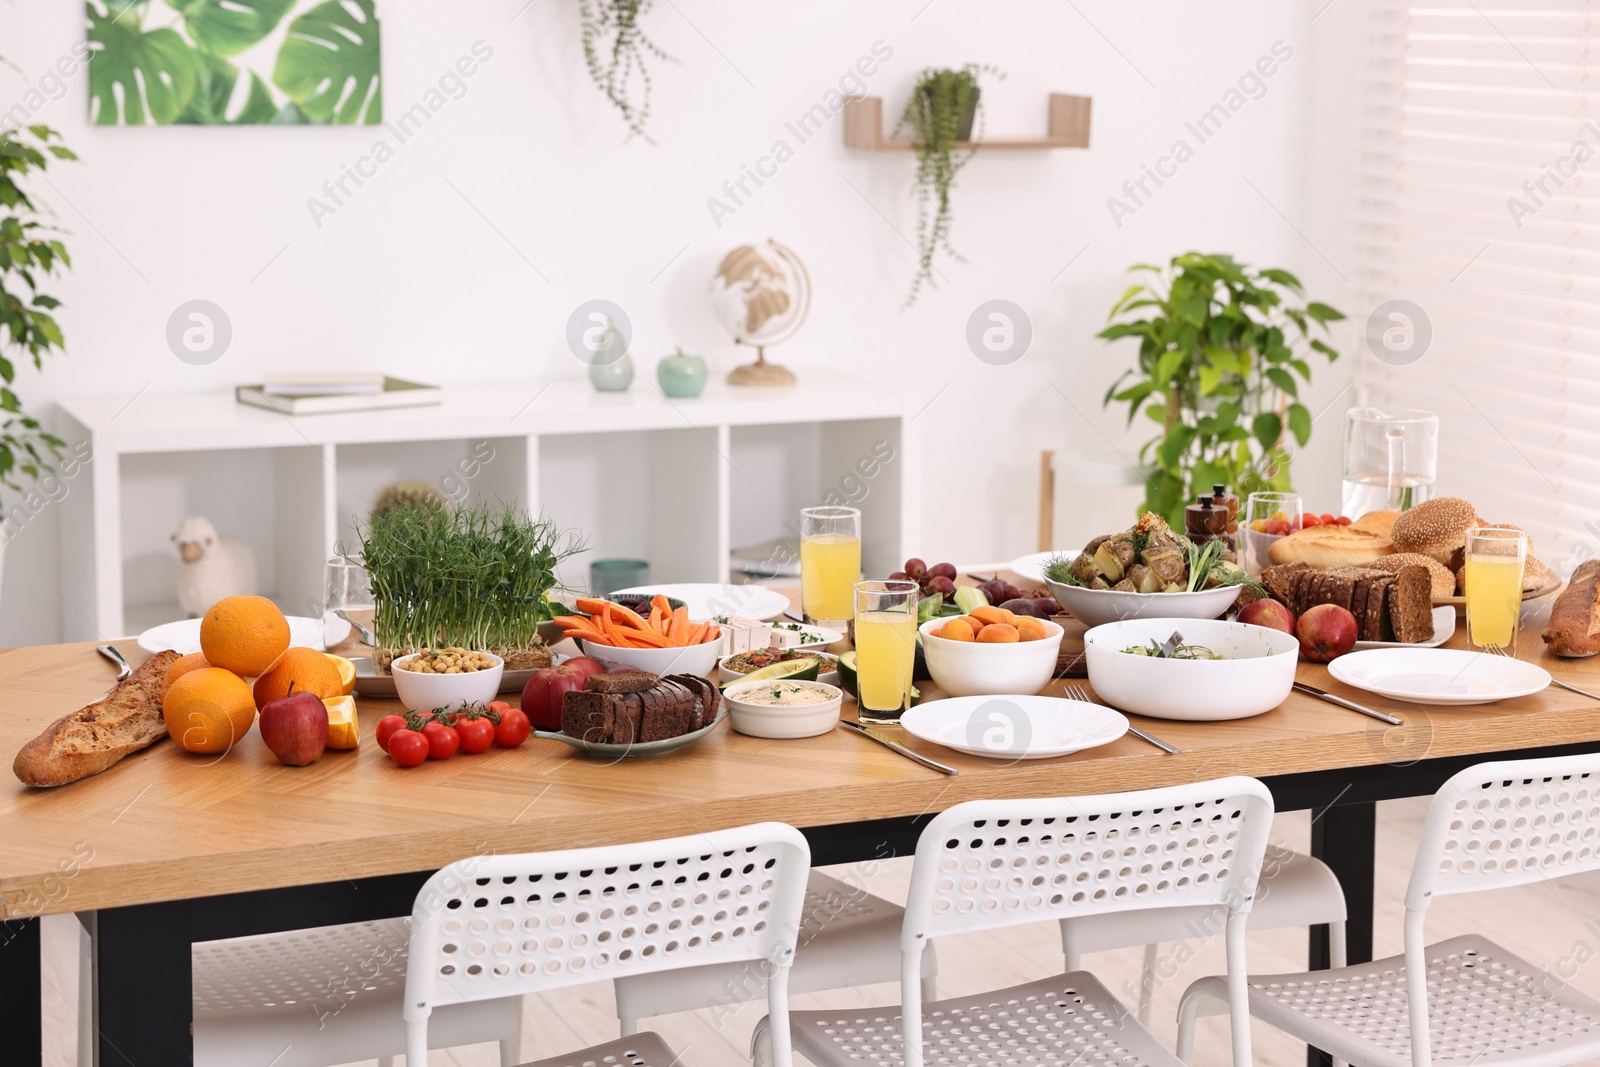 Photo of Healthy vegetarian food, glasses of juice, cutlery and plates on wooden table indoors